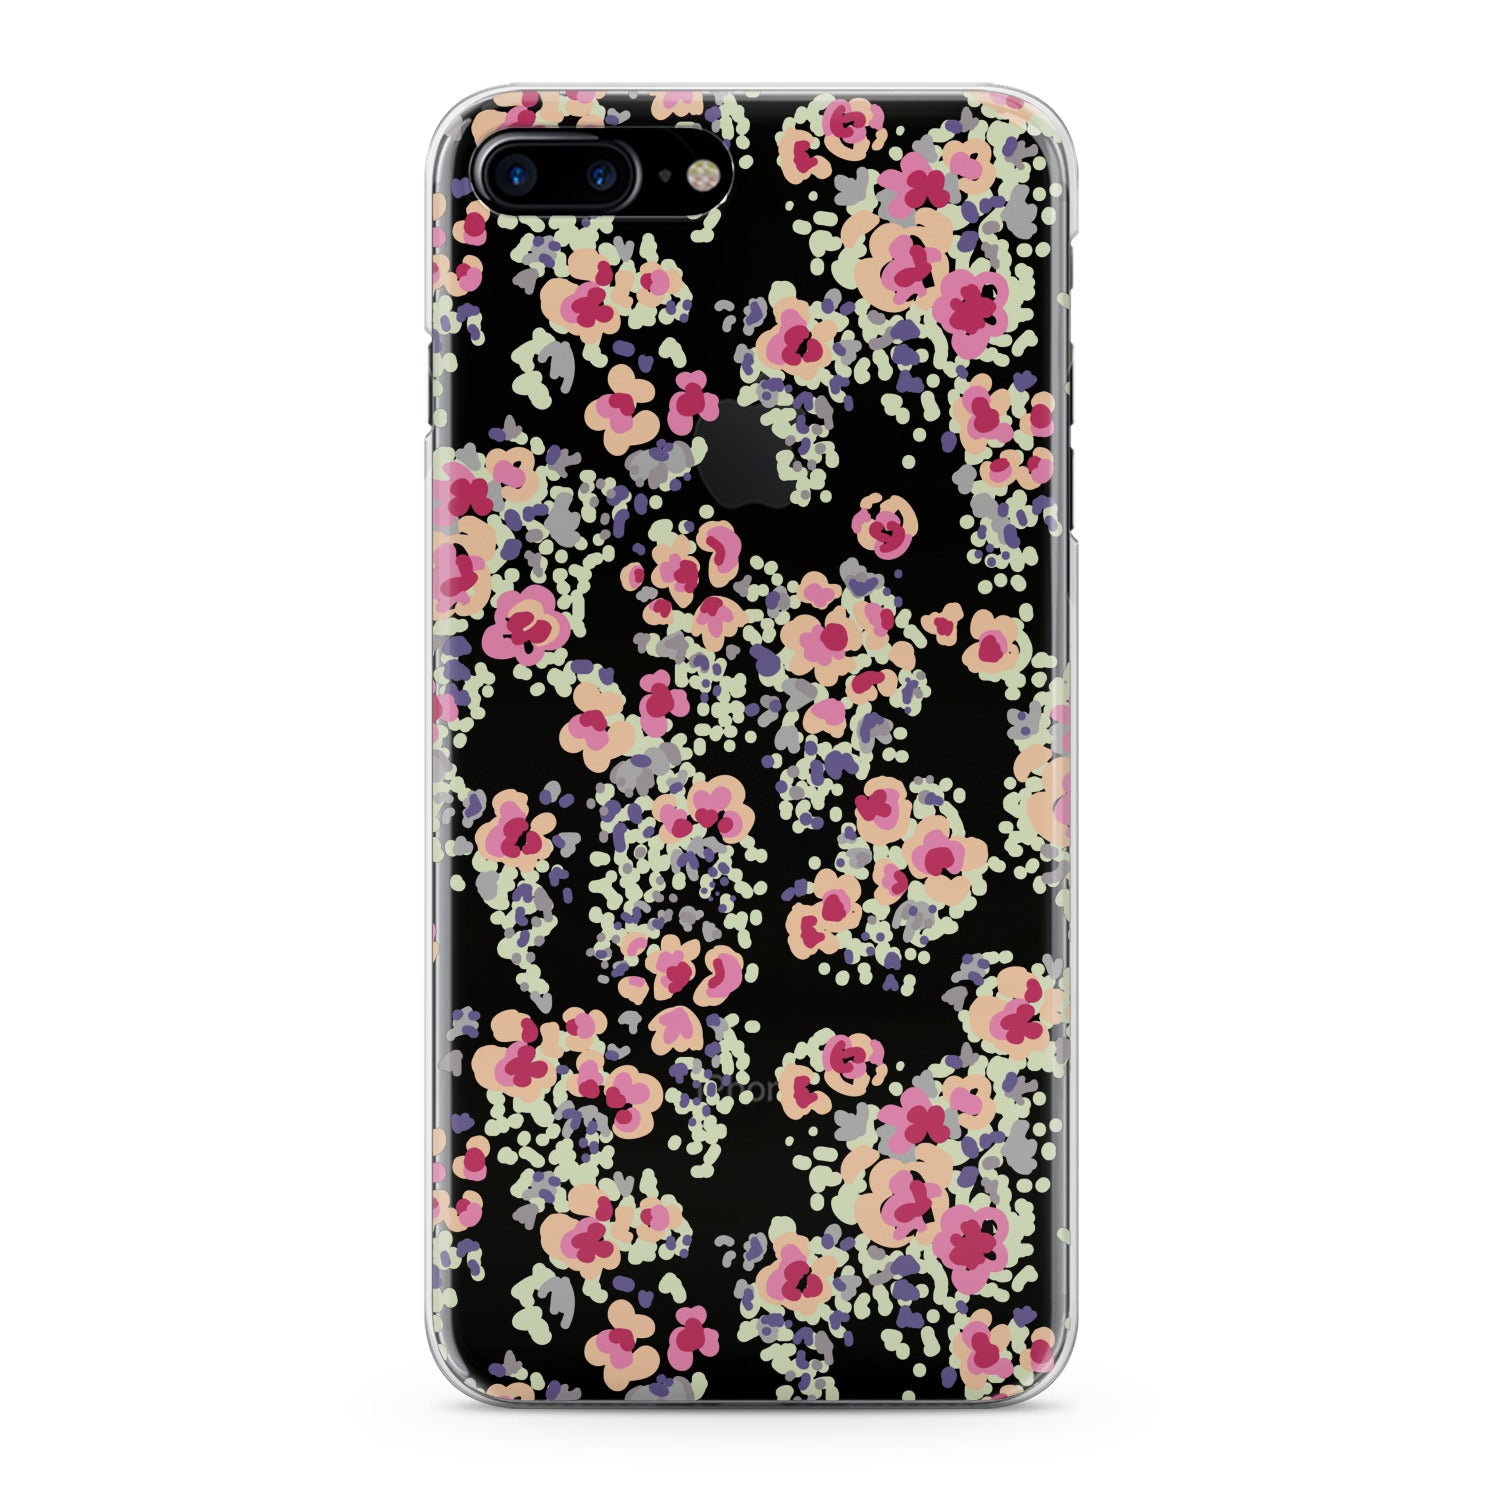 Lex Altern Cute Painted Flowers Phone Case for your iPhone & Android phone.